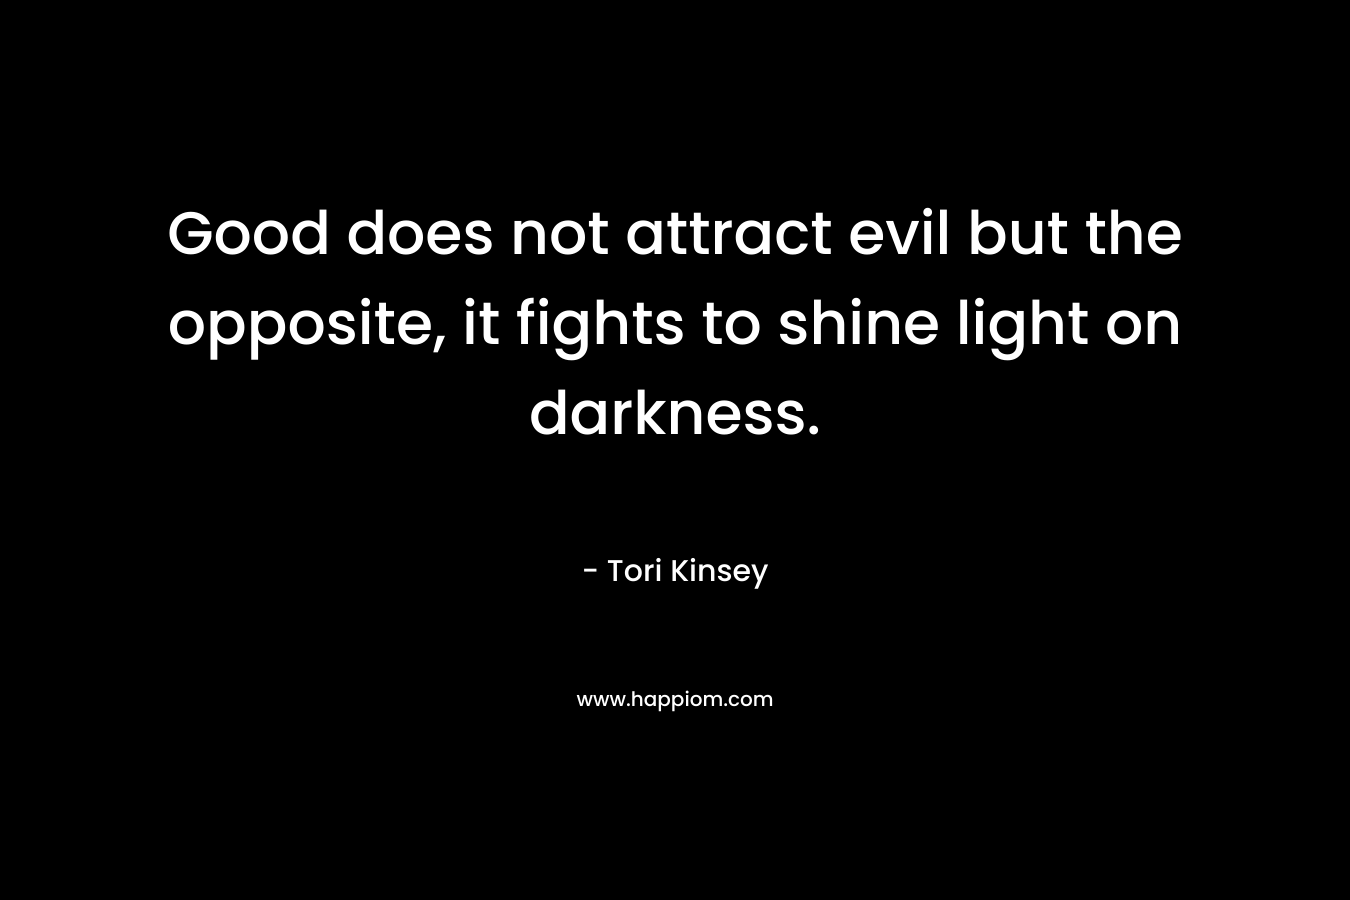 Good does not attract evil but the opposite, it fights to shine light on darkness.